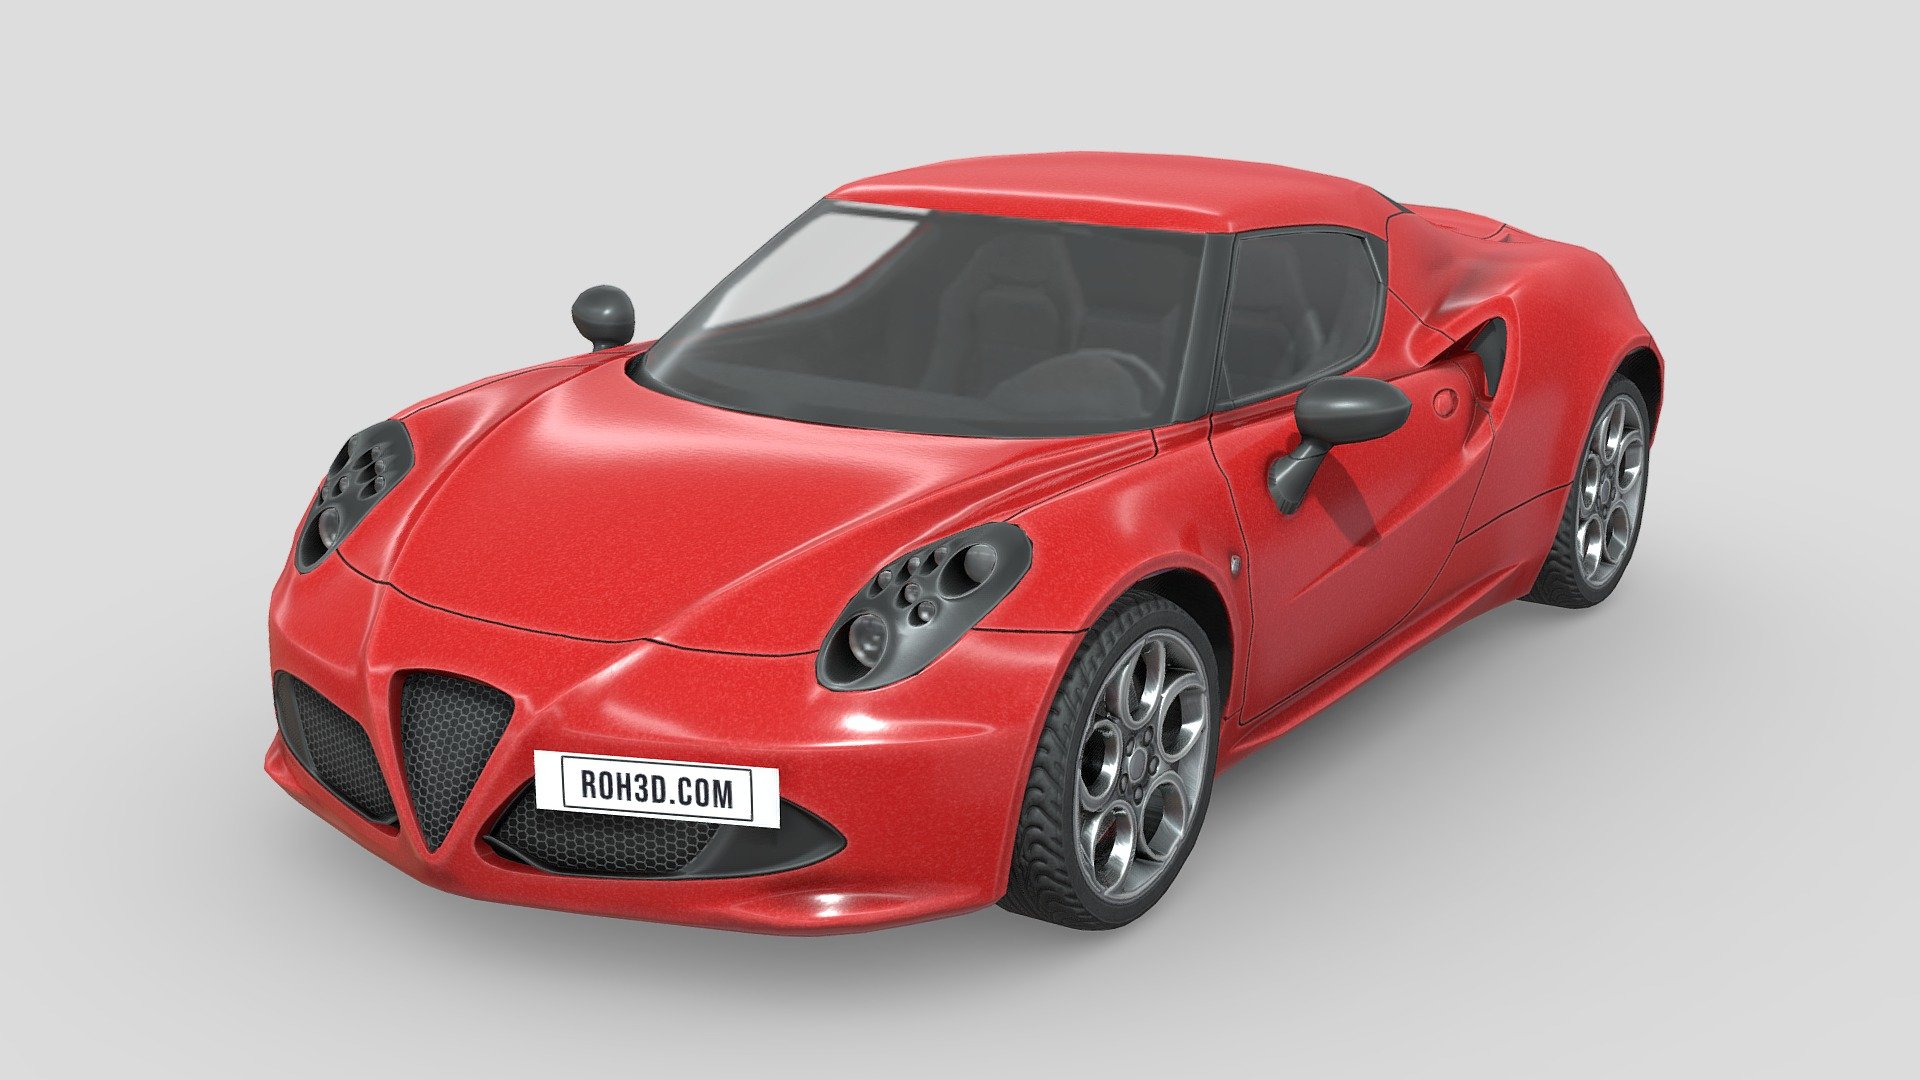 The Alfa Romeo 4C (Type 960) is a mid-engined sports car produced by Italian car manufacturer Alfa Romeo. Unveiled at the 2013 Geneva Motor Show, the 4C was initially only available as a coupé, with a spider body style coming a few years later in 2015. The name 4C refers to the four-cylinder engine.

The Alfa Romeo 4C Concept is a two-seater, rear-wheel drive coupé with technology and materials derived from the Alfa Romeo 8C Competizione, with a 1750 cc turbo petrol engine with direct injection, the &ldquo;Alfa TCT